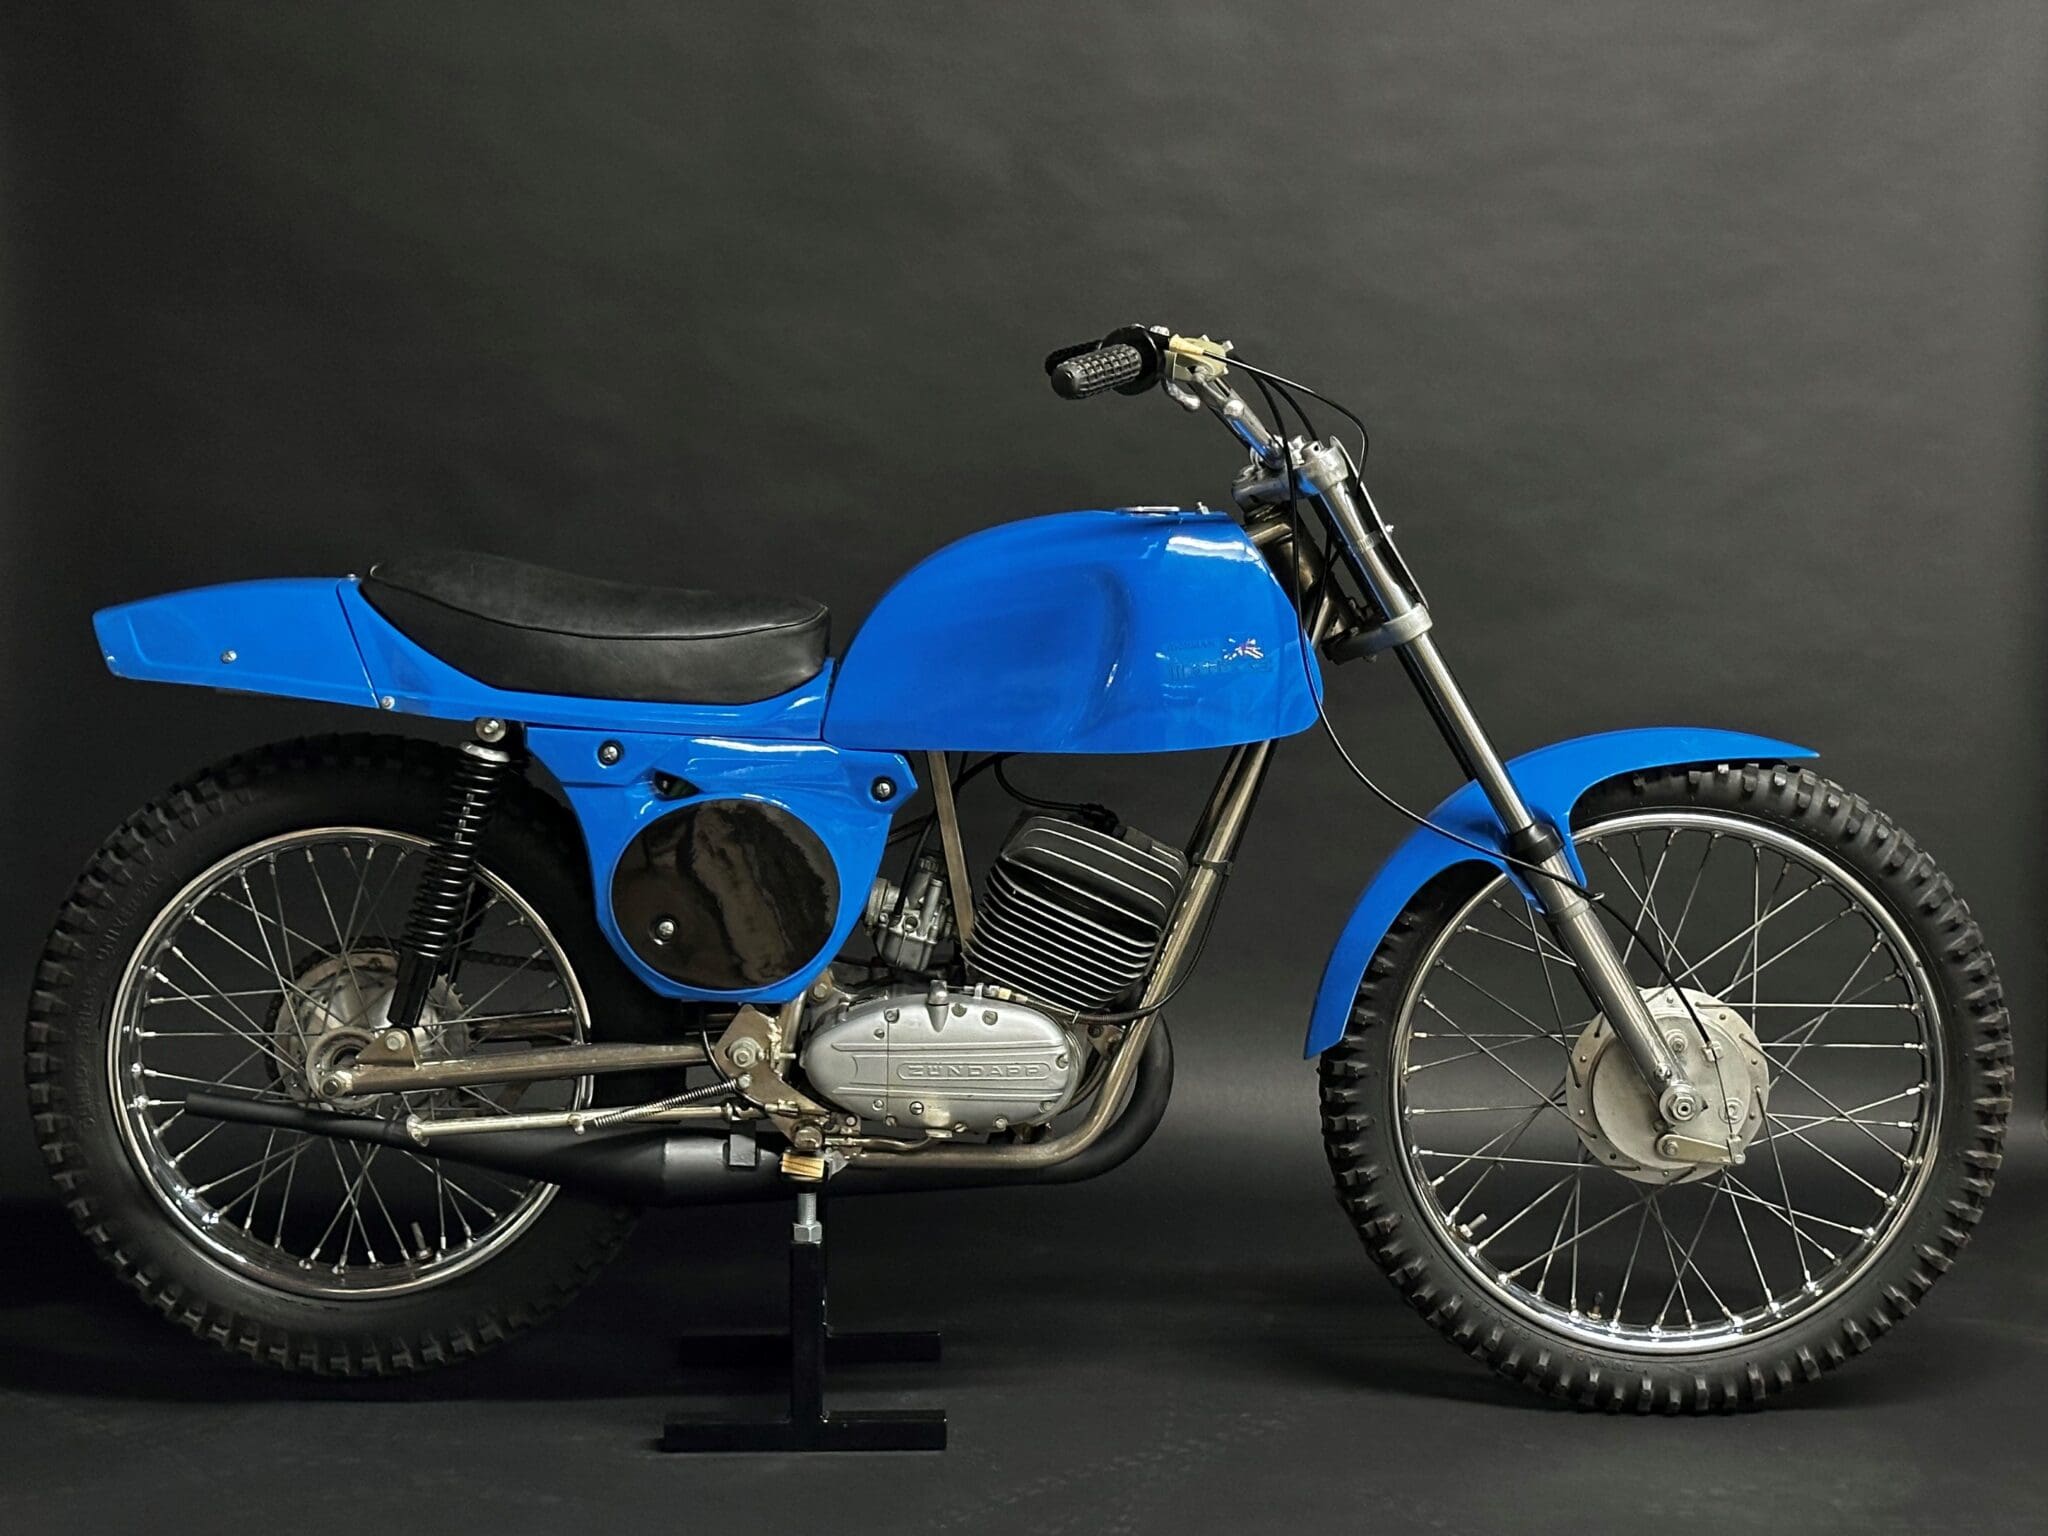 A Blue Color Bike With a Single Seat, Image From Right